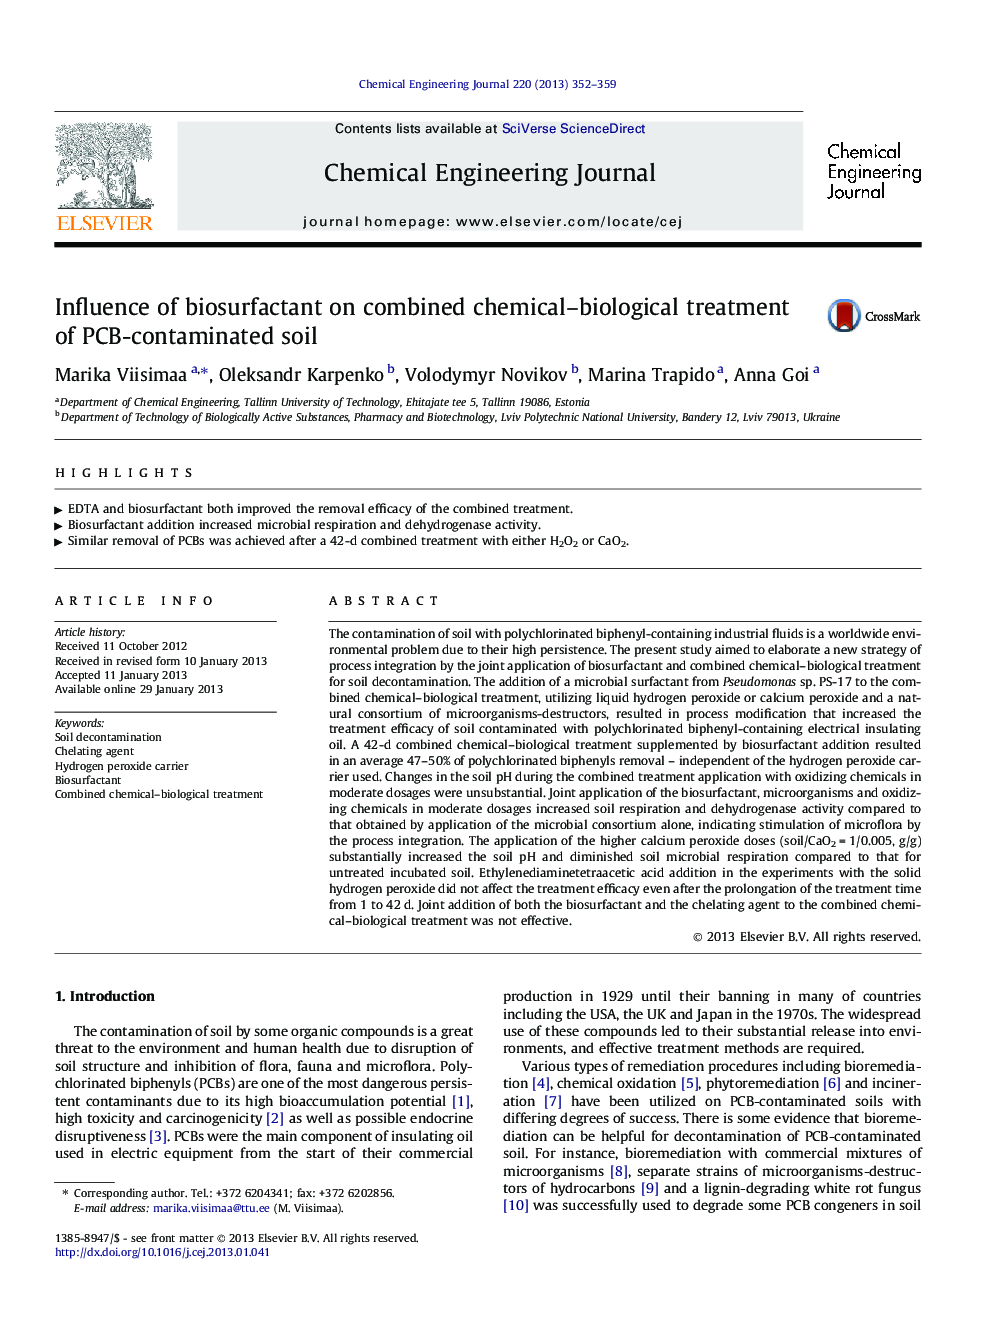 Influence of biosurfactant on combined chemical–biological treatment of PCB-contaminated soil